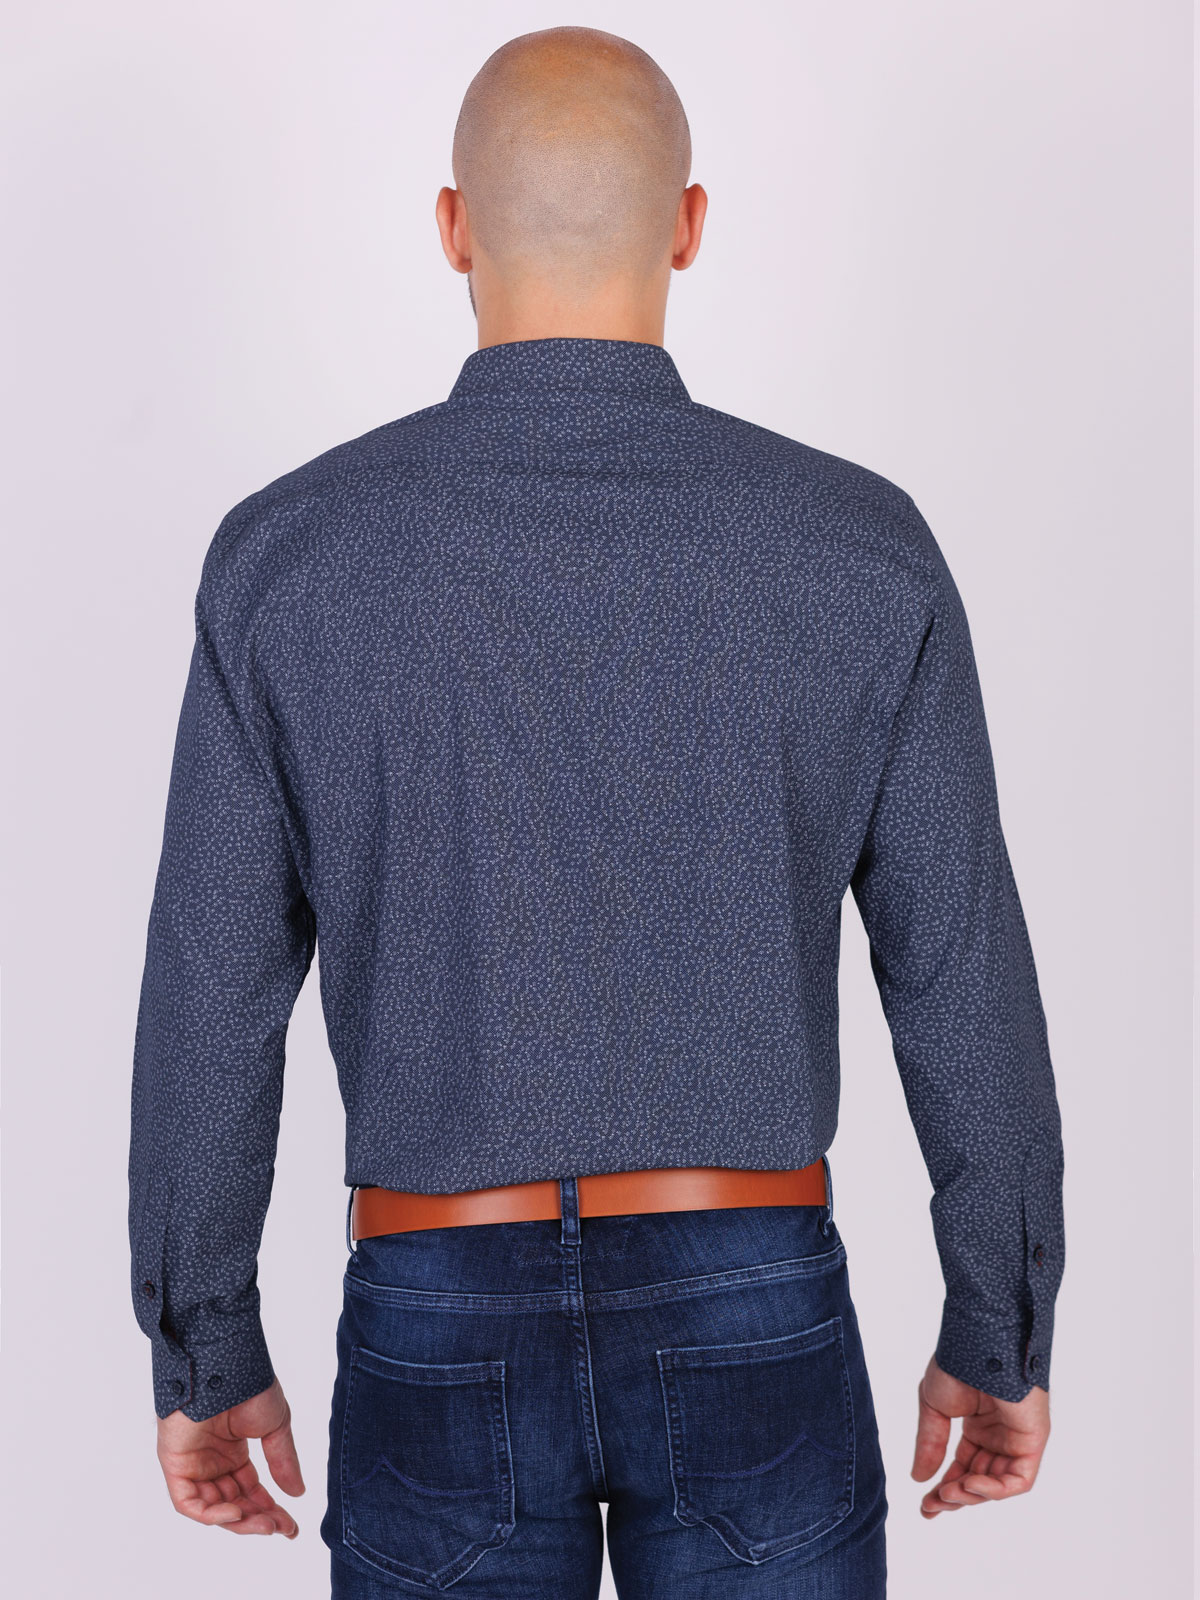 Mens shirt with gray figures - 21575 € 44.43 img2